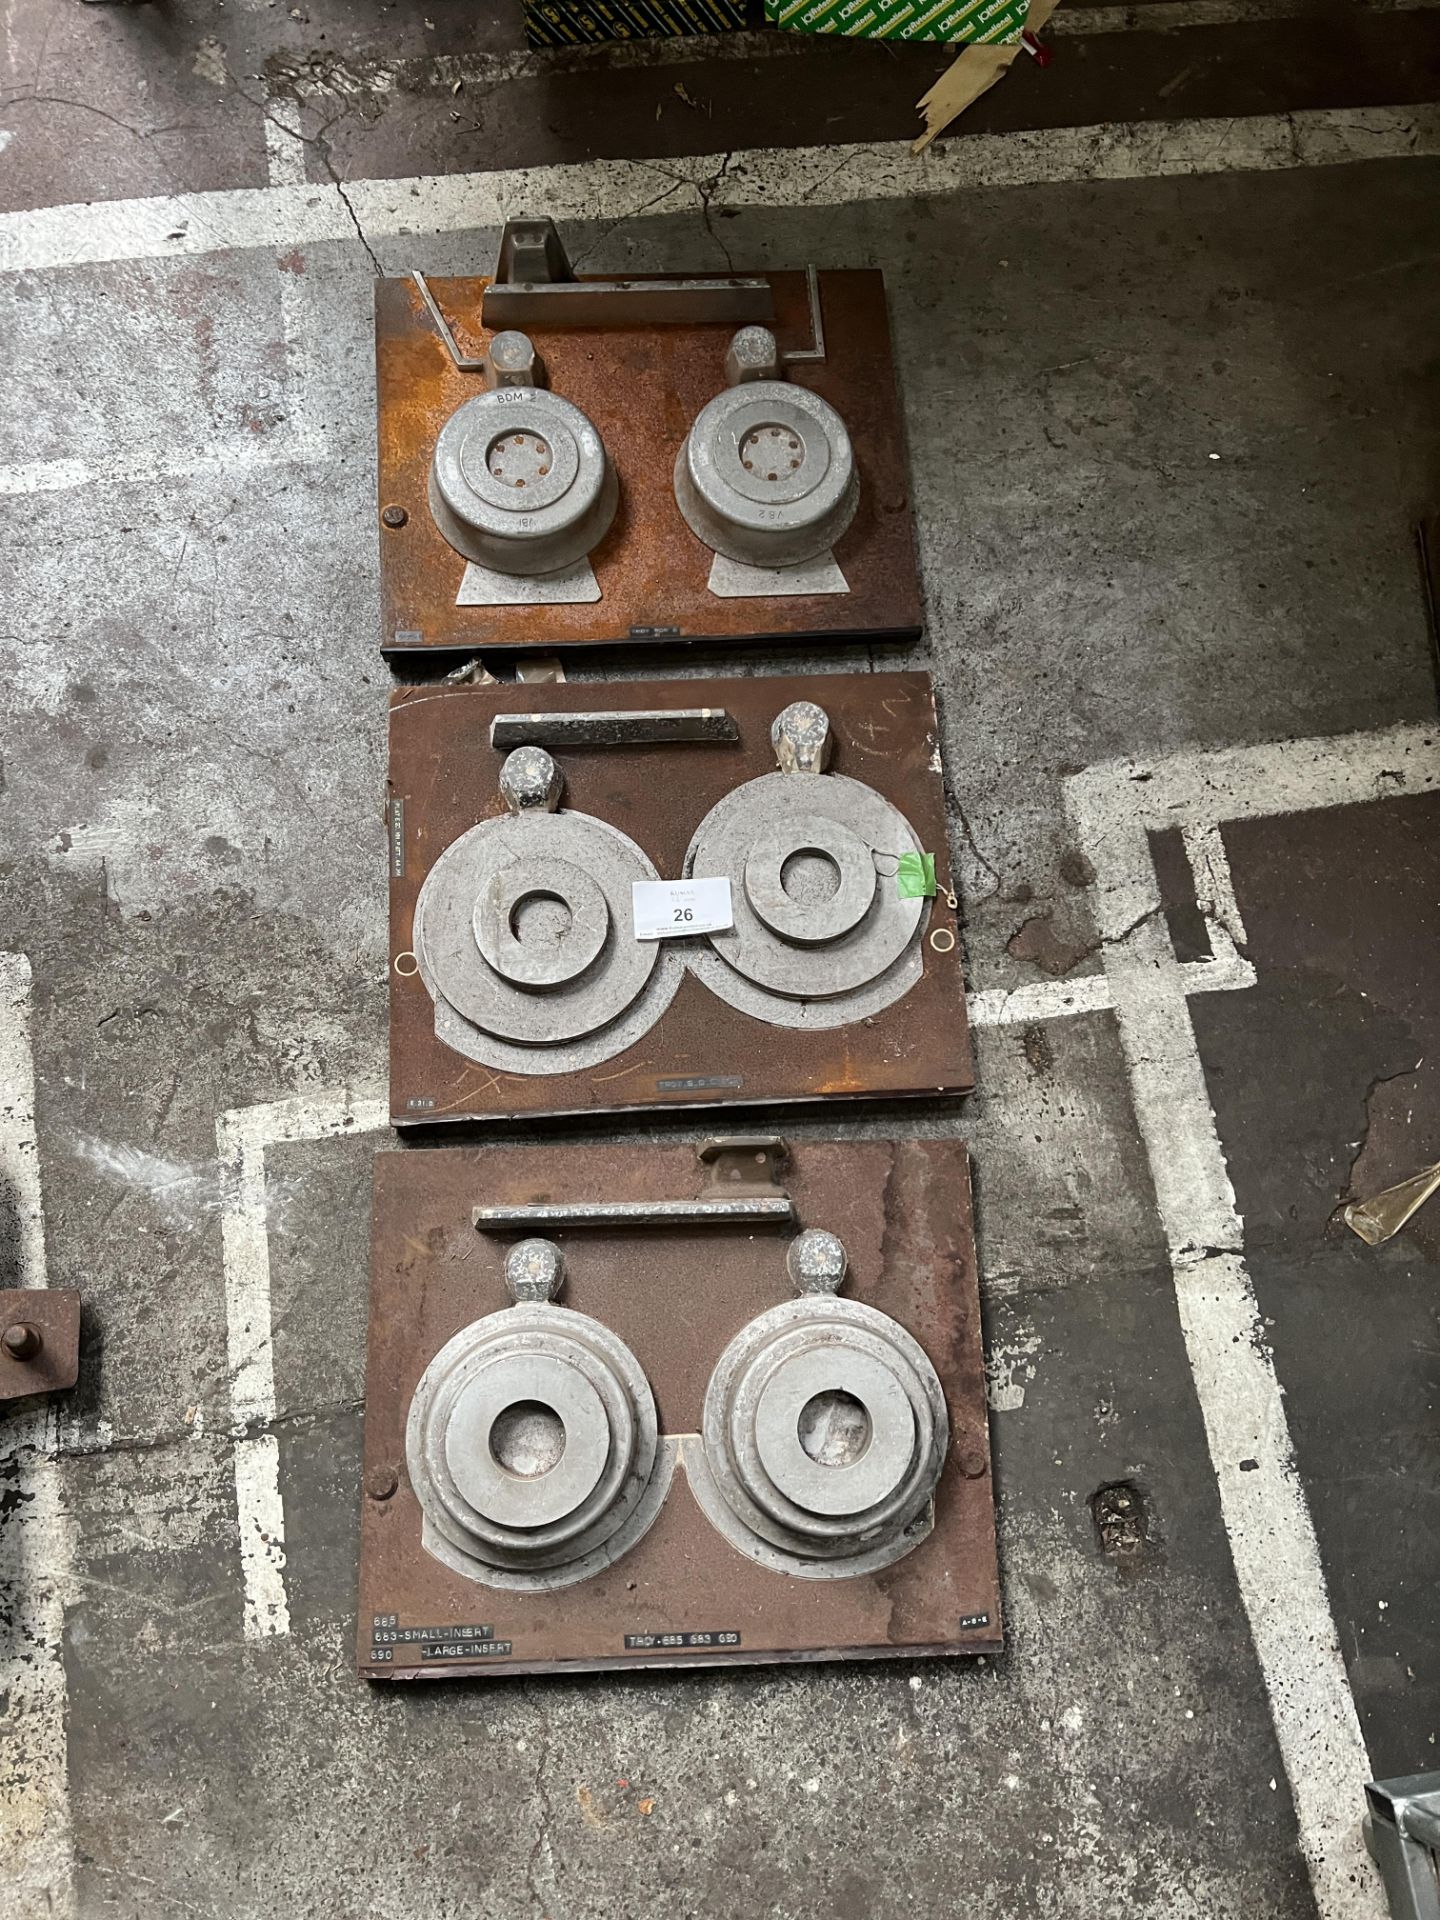 3: Various Single Sides of Brake Disc and Drum Casting Patterns. Bottom Mould is for Austin,